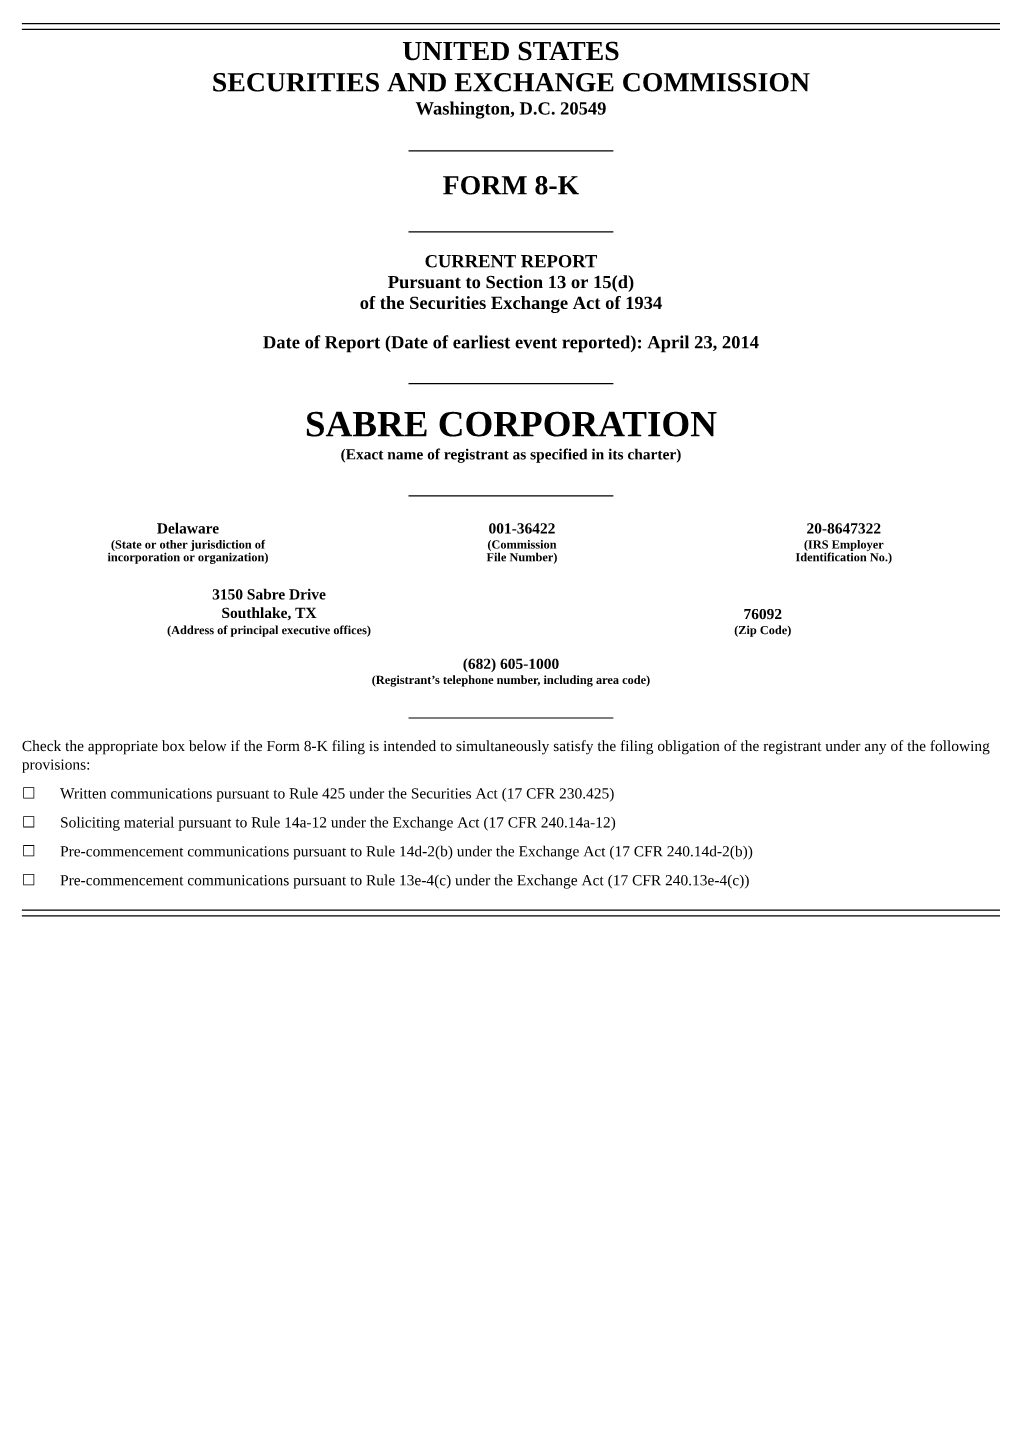 SABRE CORPORATION (Exact Name of Registrant As Specified in Its Charter)